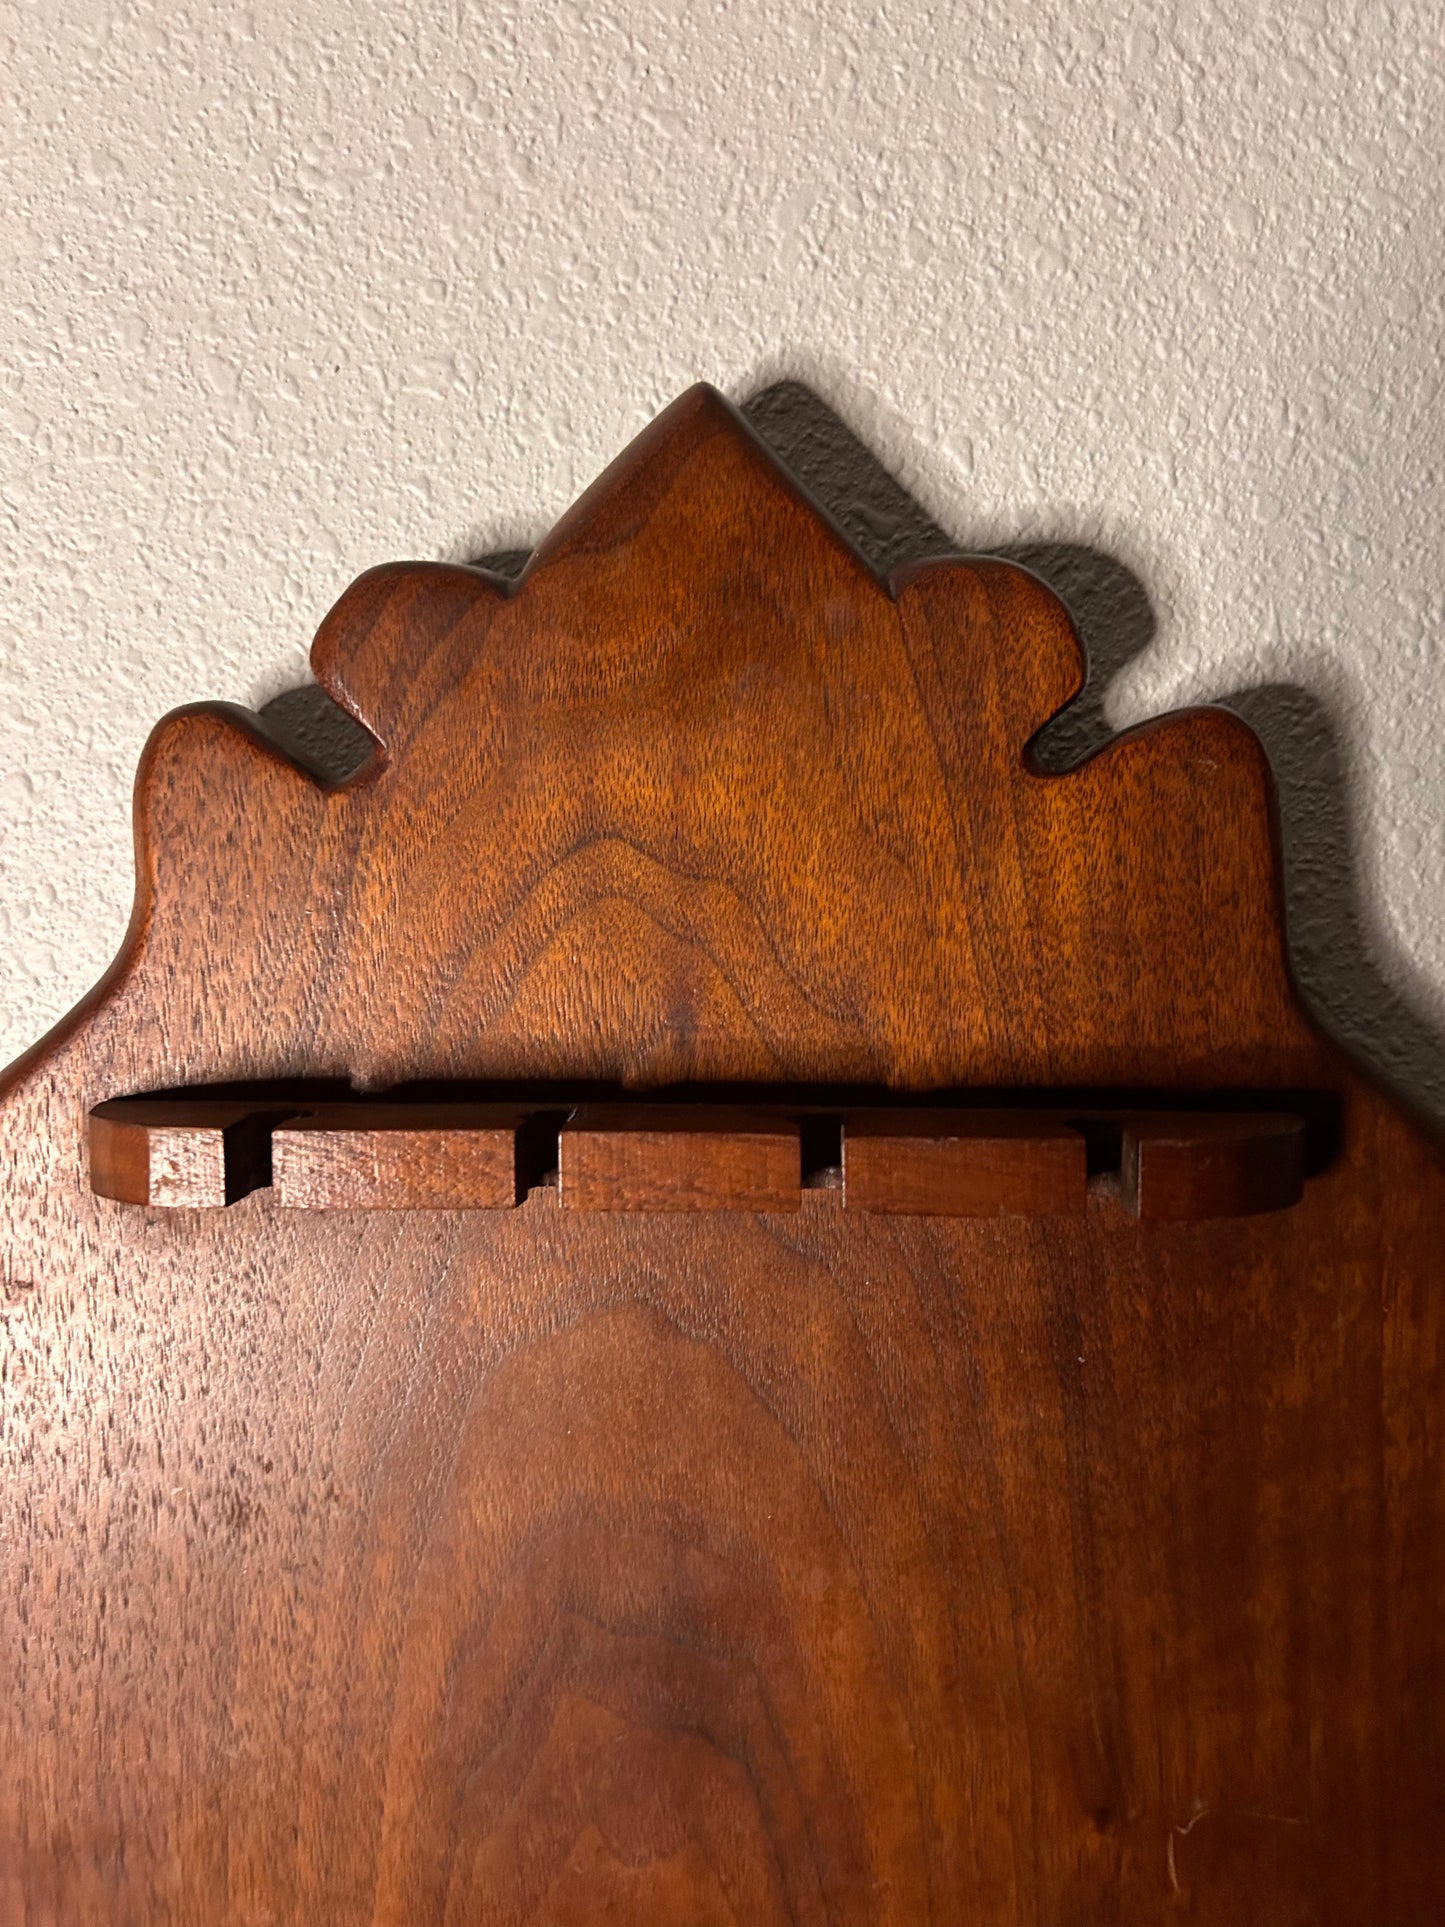 Large Wooden Wall Holder for Spoons/Necklaces